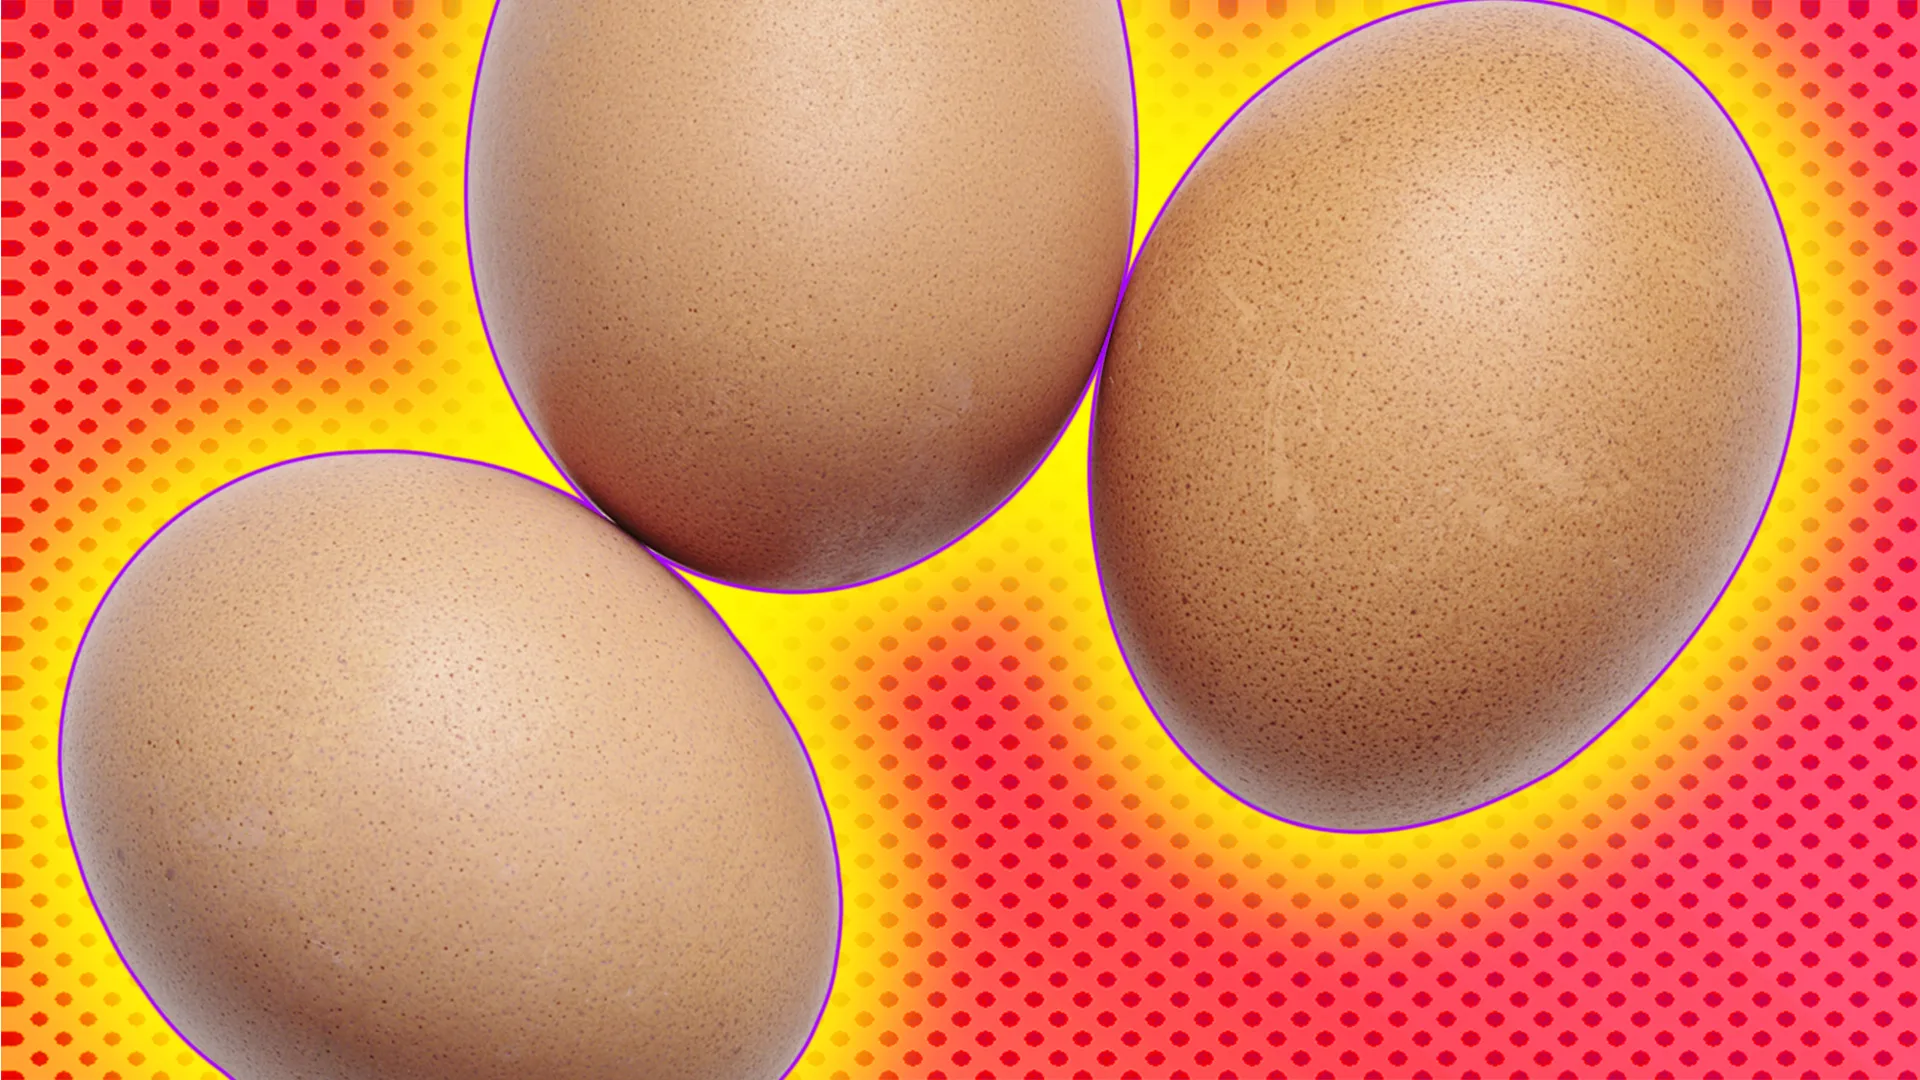 Three eggs with a purple and yellow glow around them on a pink background